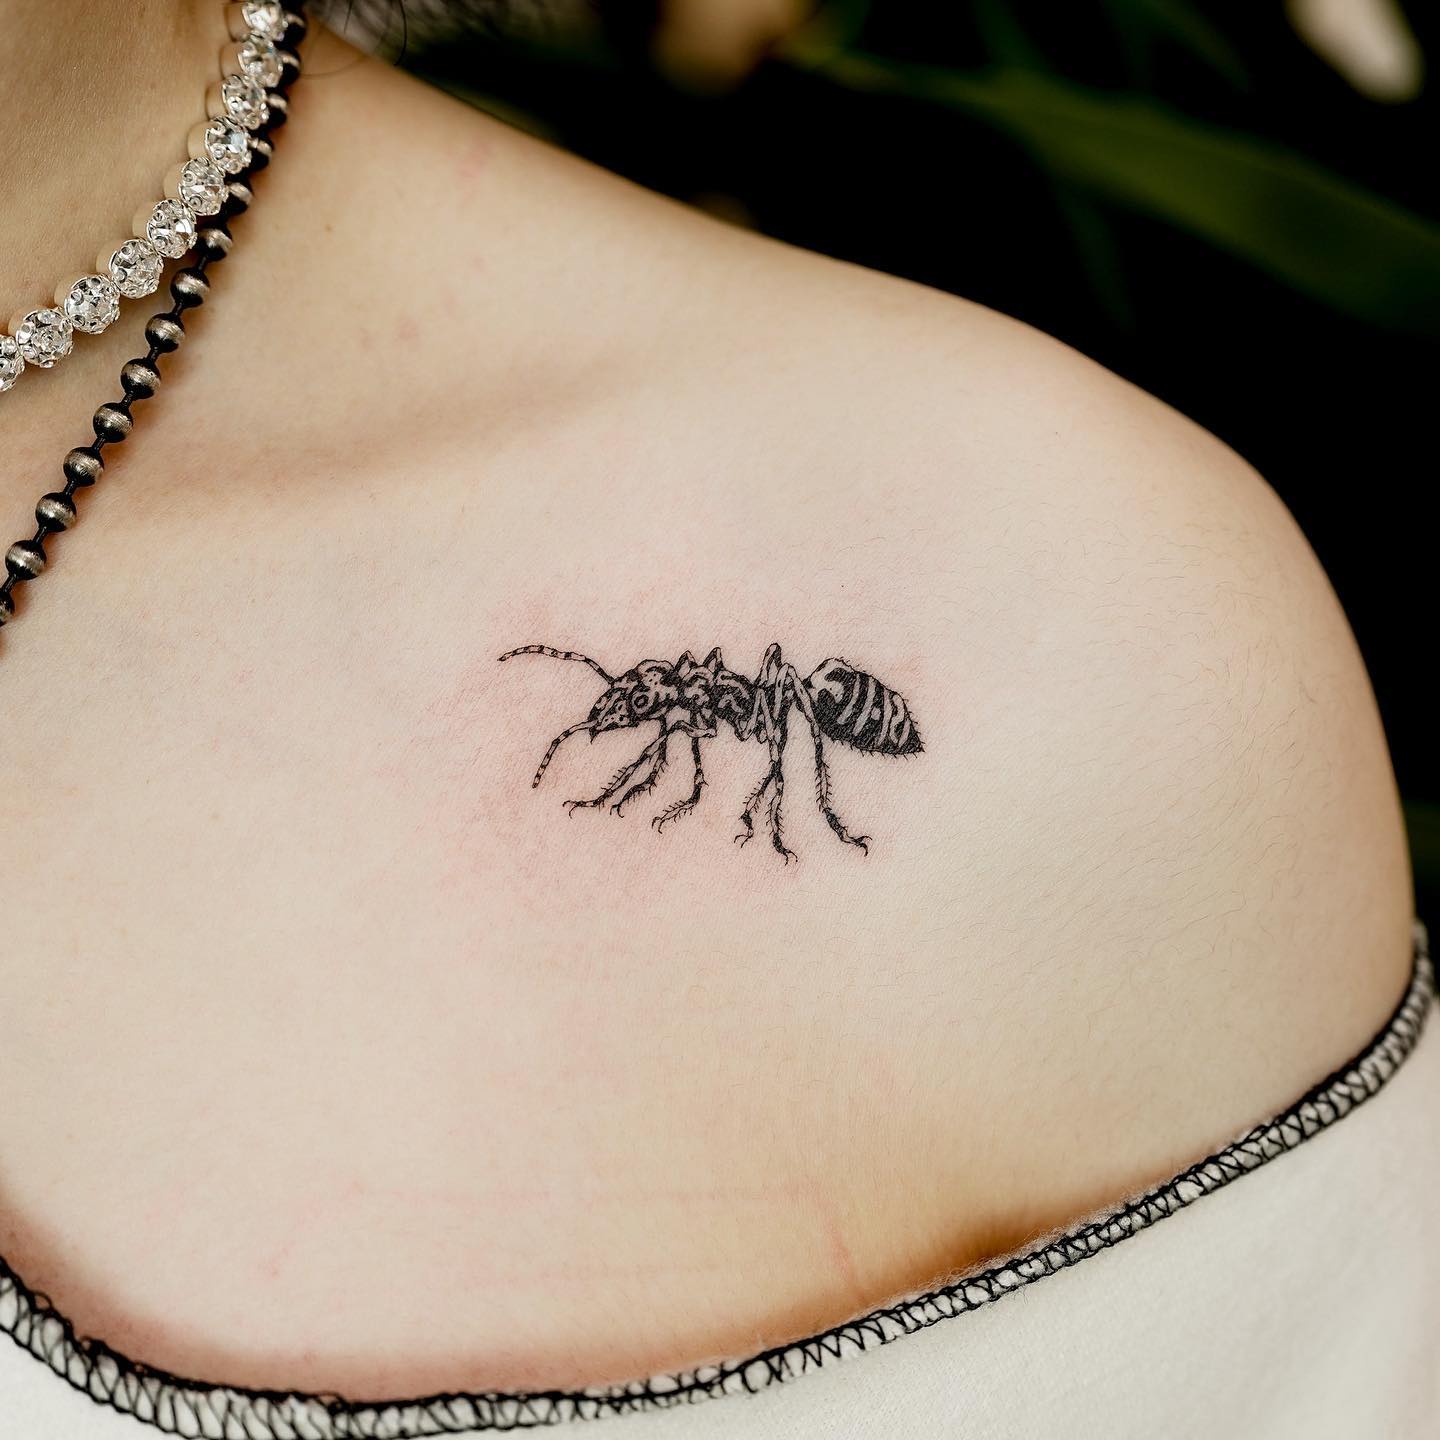 Ant tattoo by 92 noise